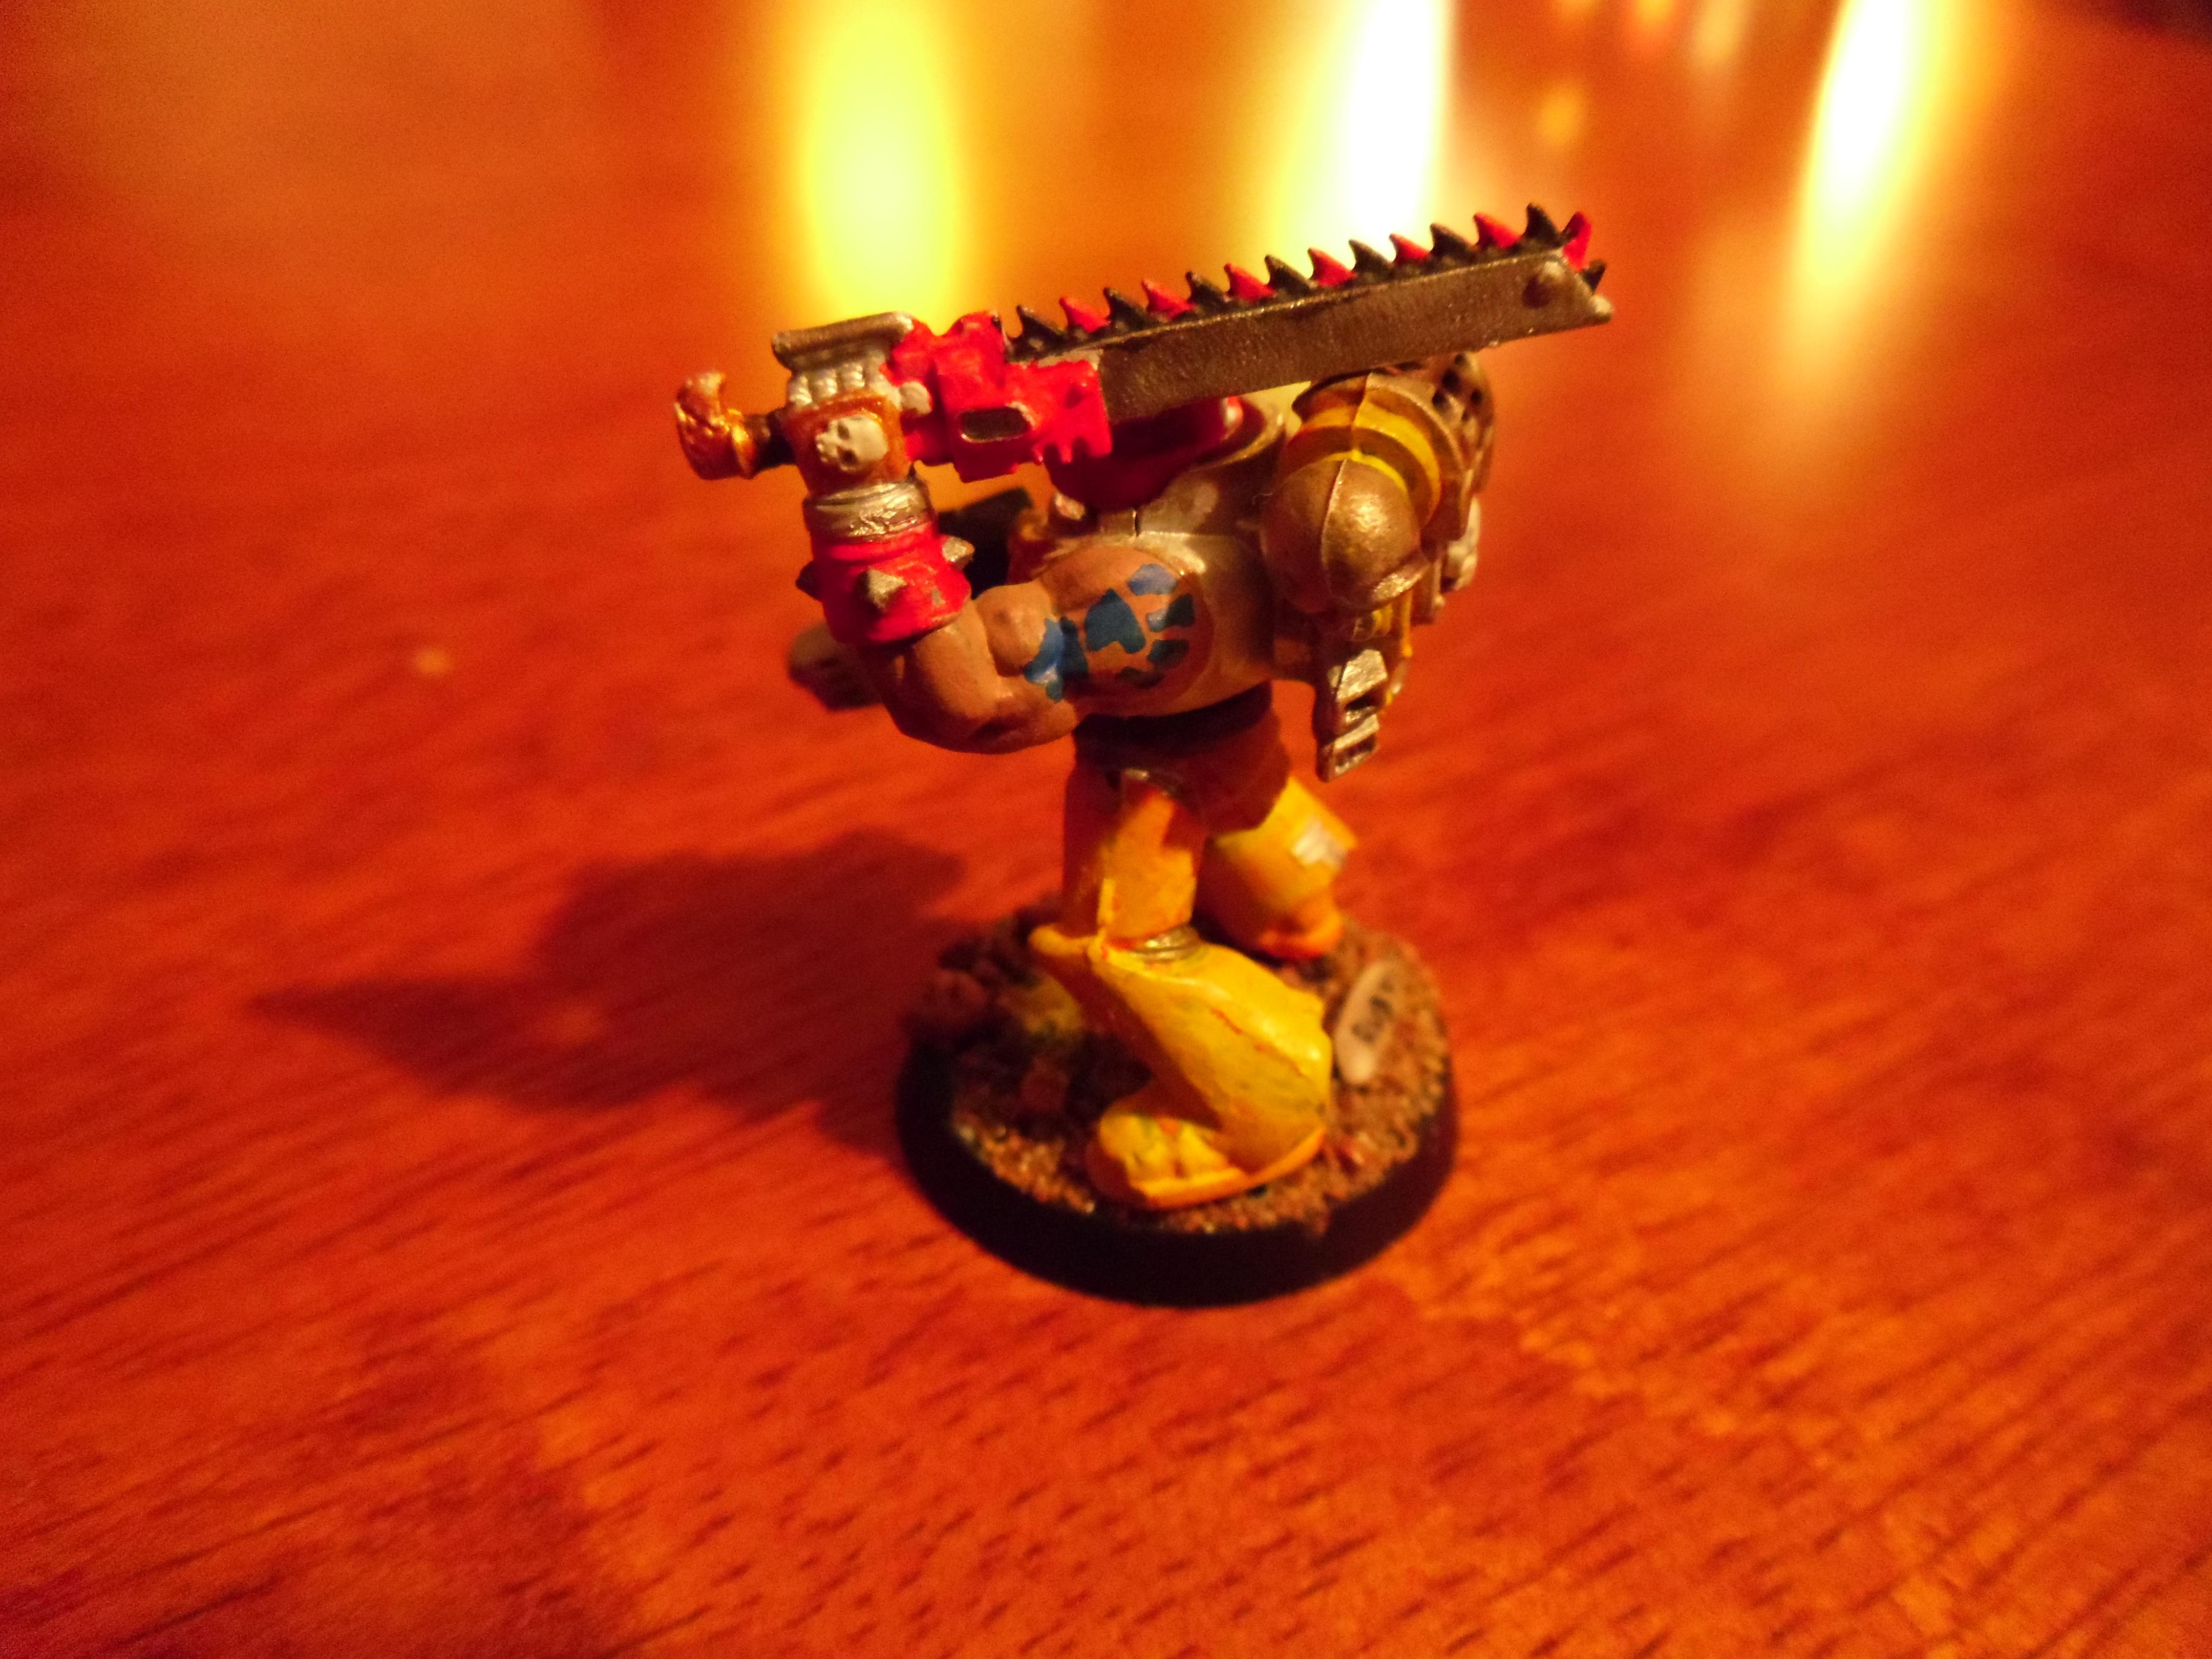 Angry, Budget, Cheap, Codex, Conversion, Fist, Humor, Imperial, Ork Abuse, Vengeance, Yellow